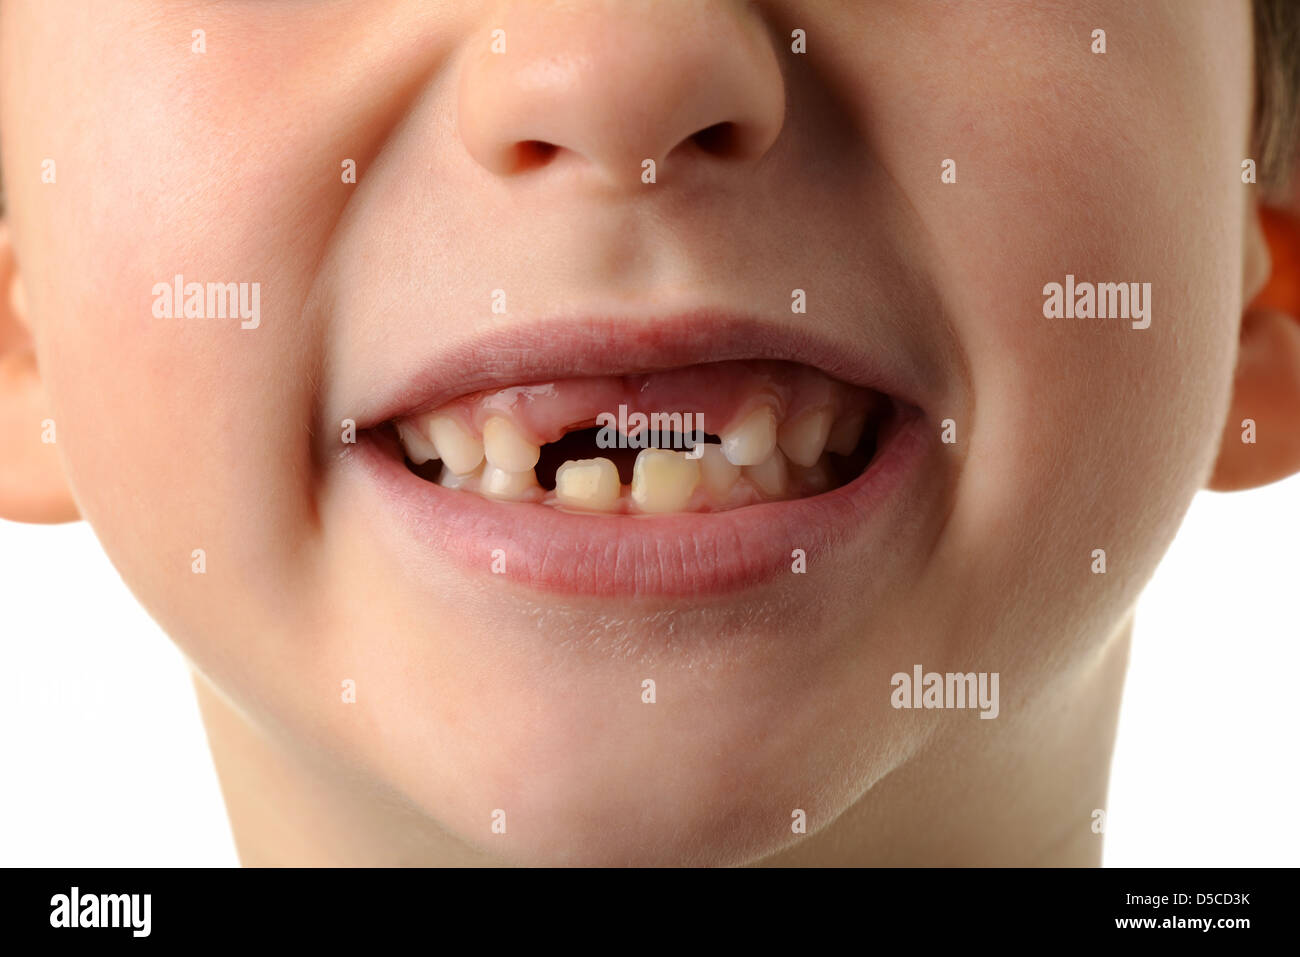 Child missing his two top teeth, close-up of mouth of boy showing his two top teeth missing. Stock Photo